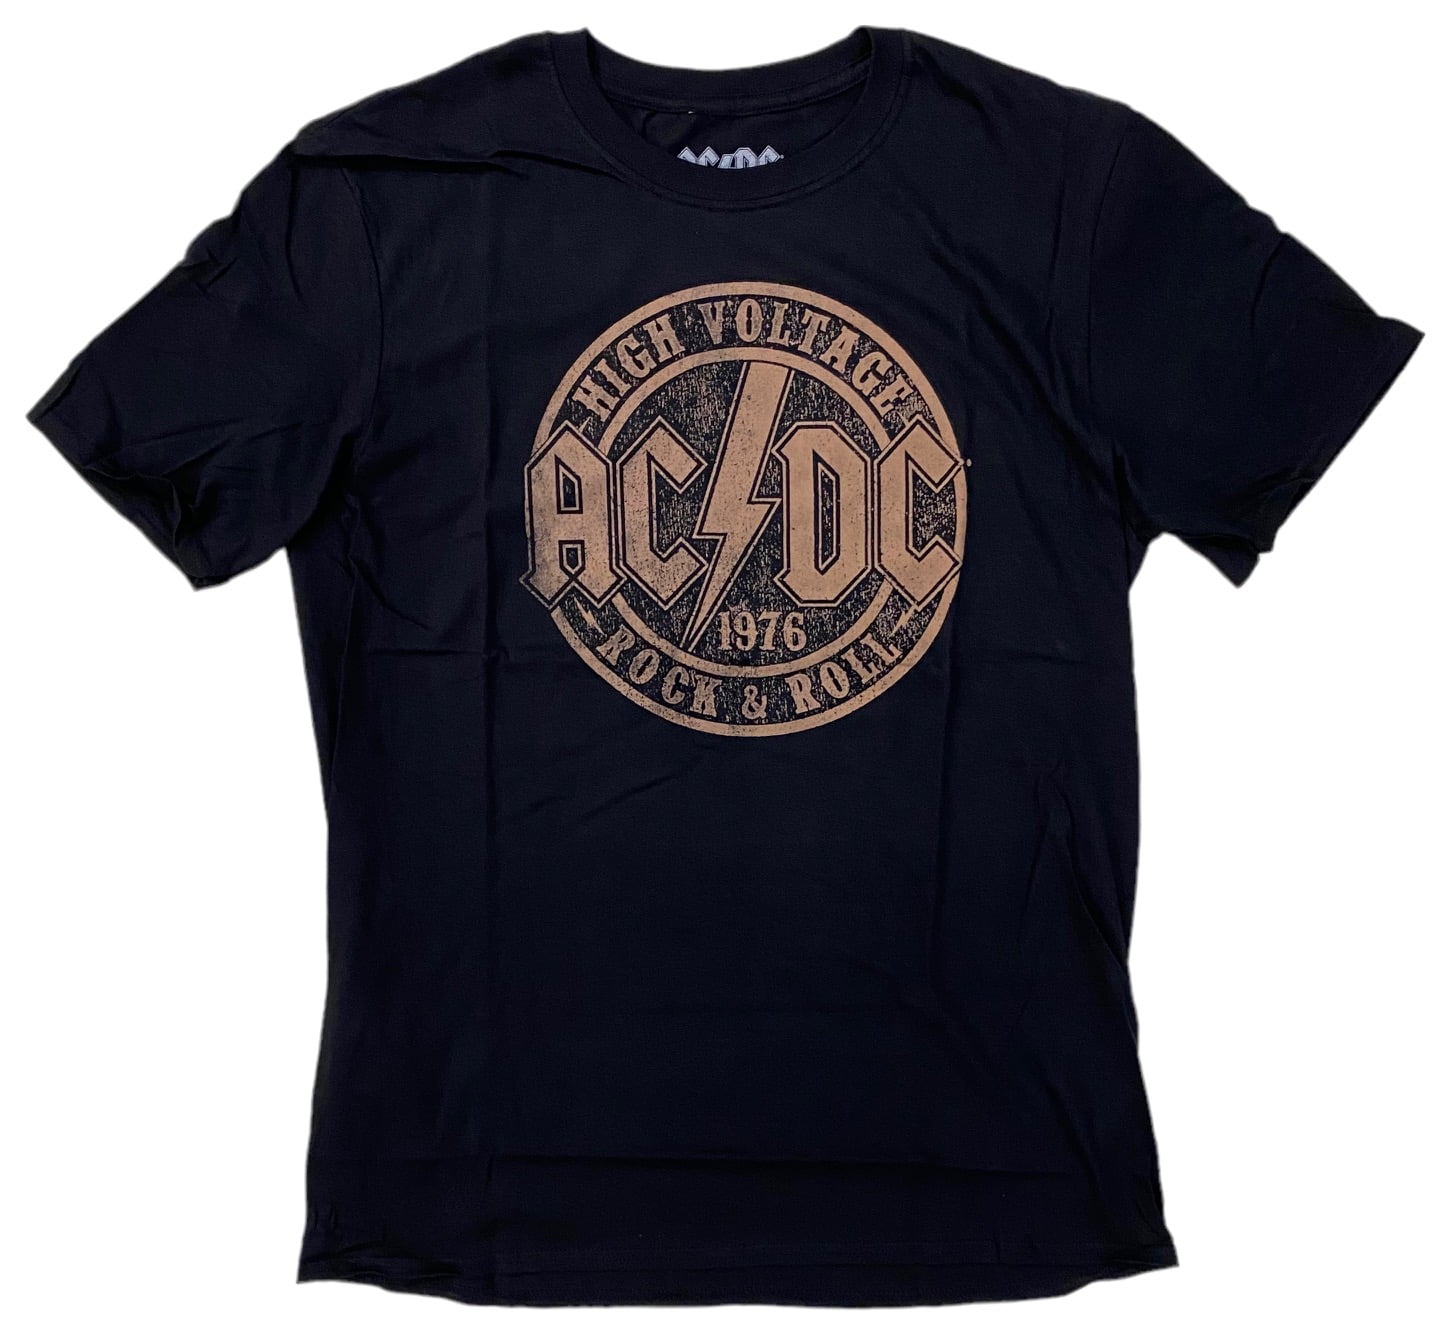 AC/DC Men's Officially Licensed Distressed High Voltage 1976 Rock 